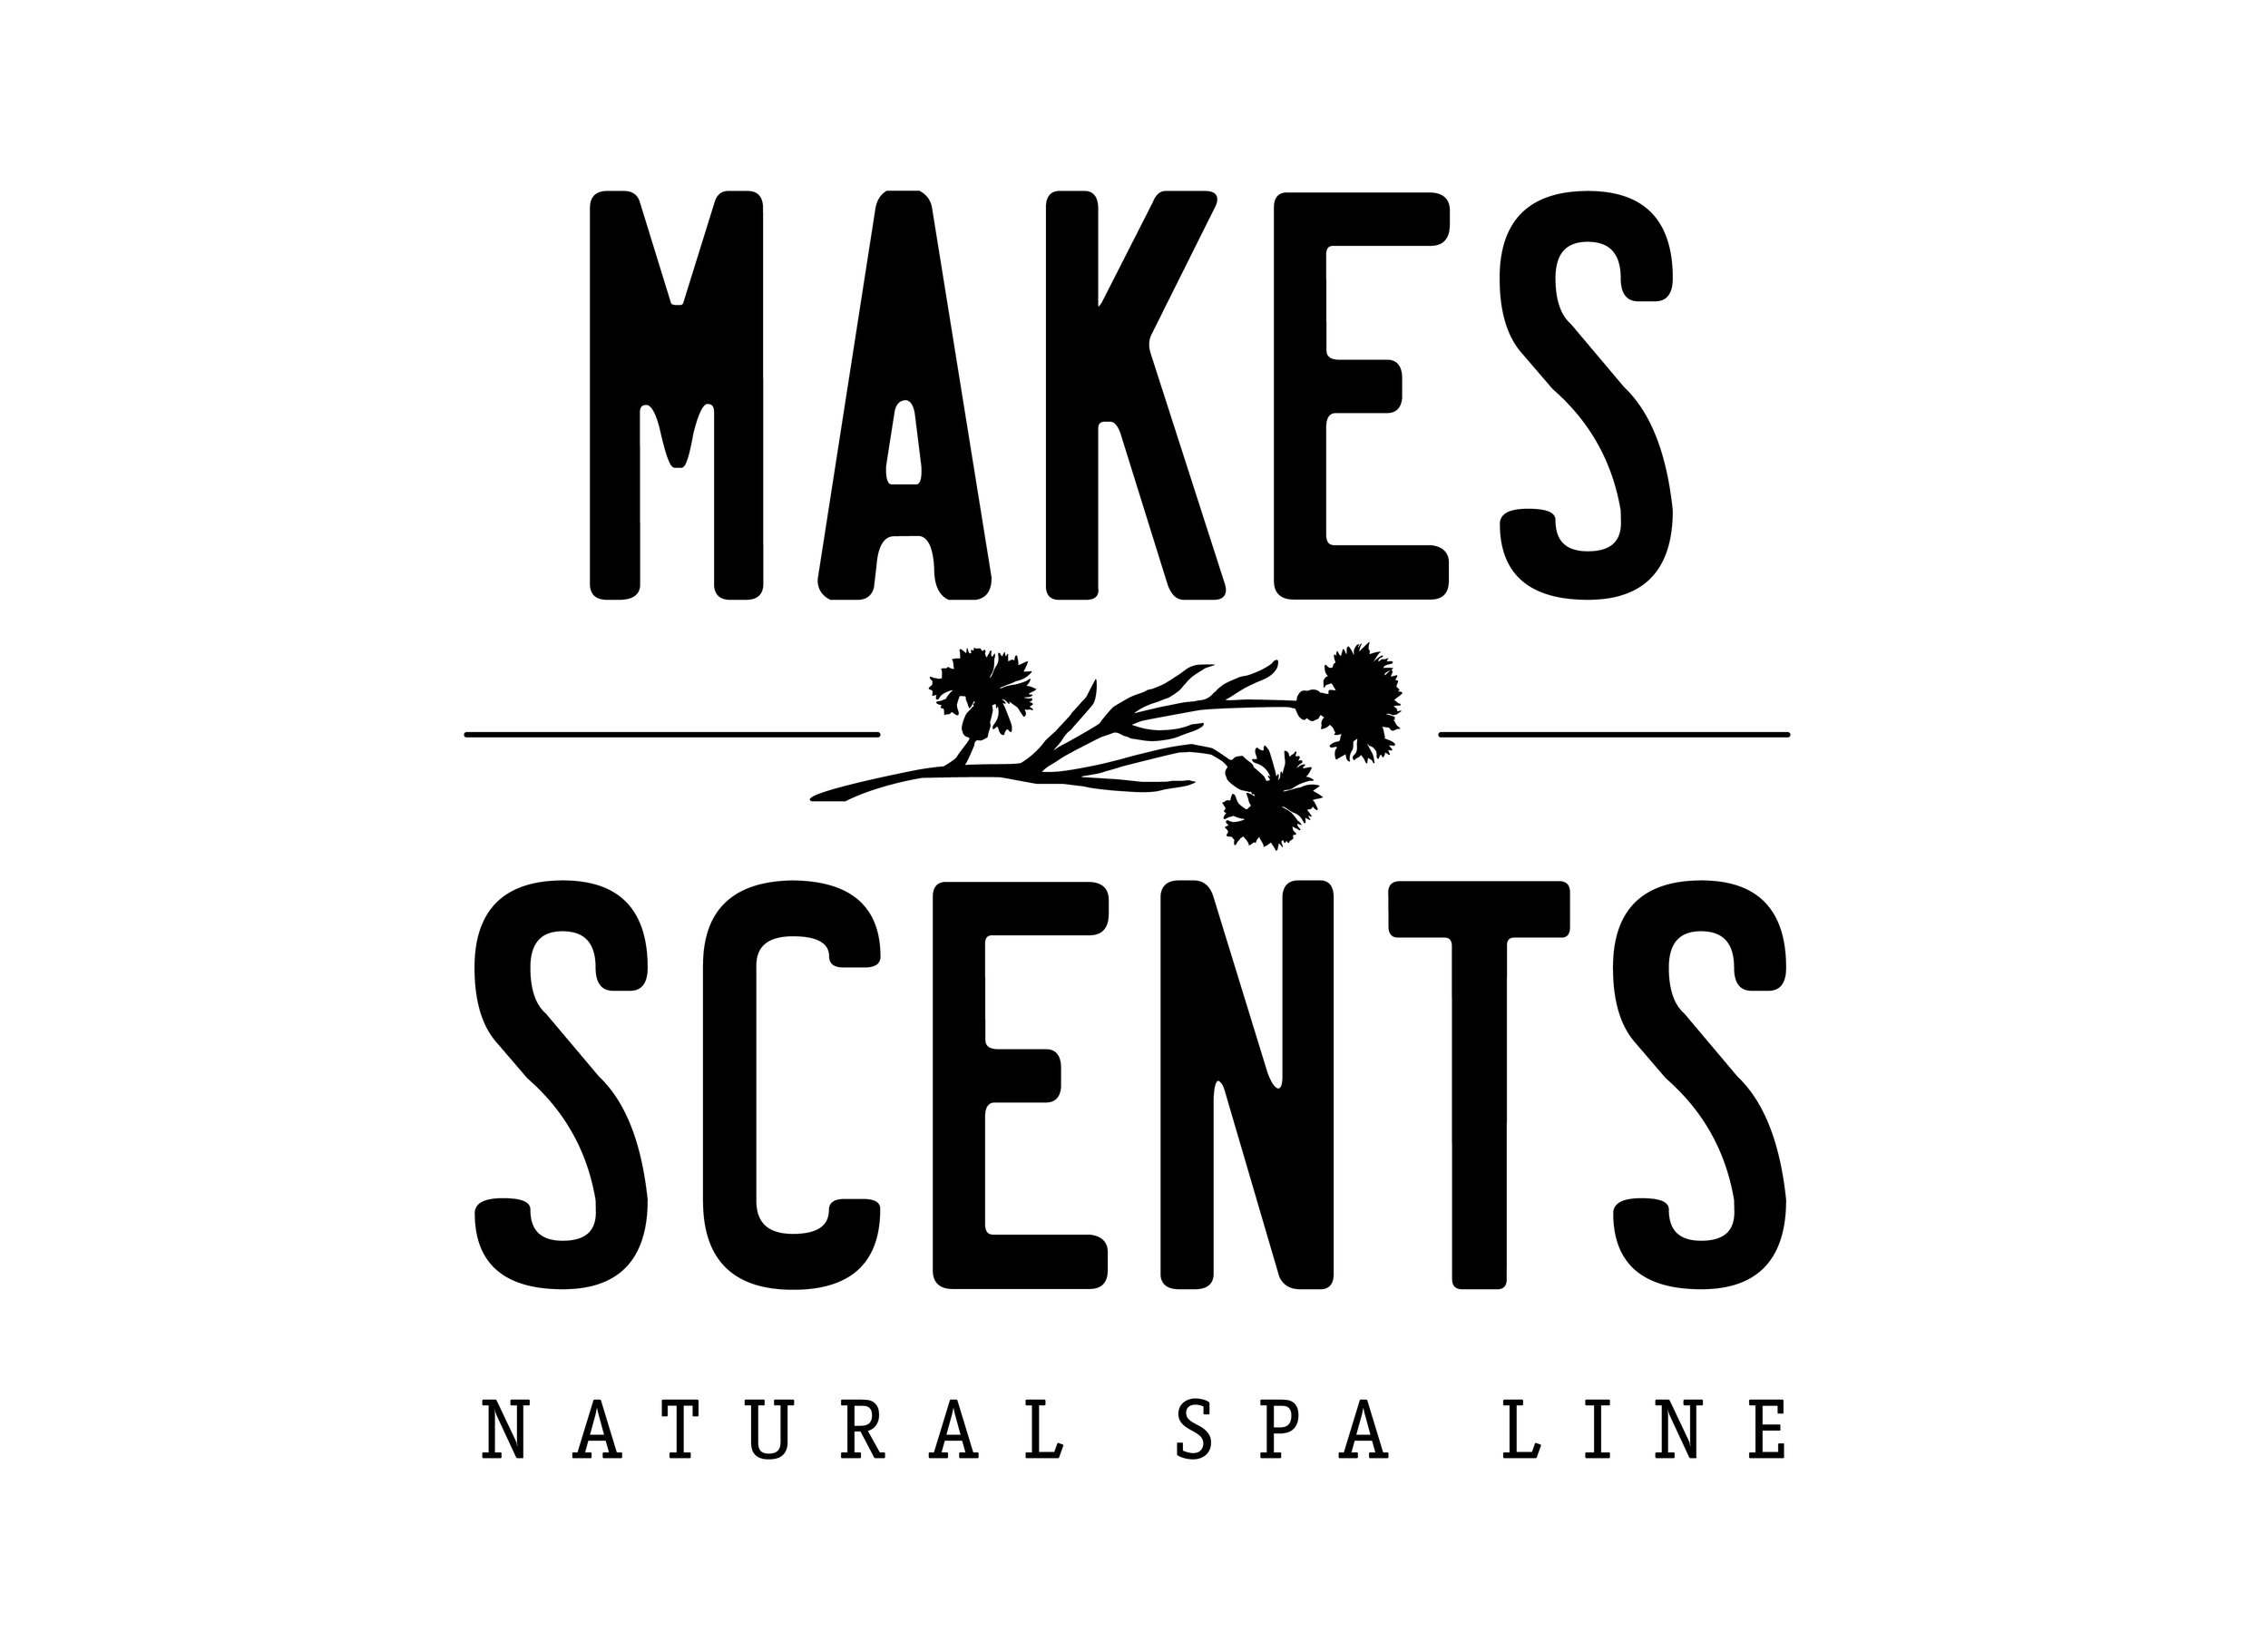 Makes Scents Natural Spa Line